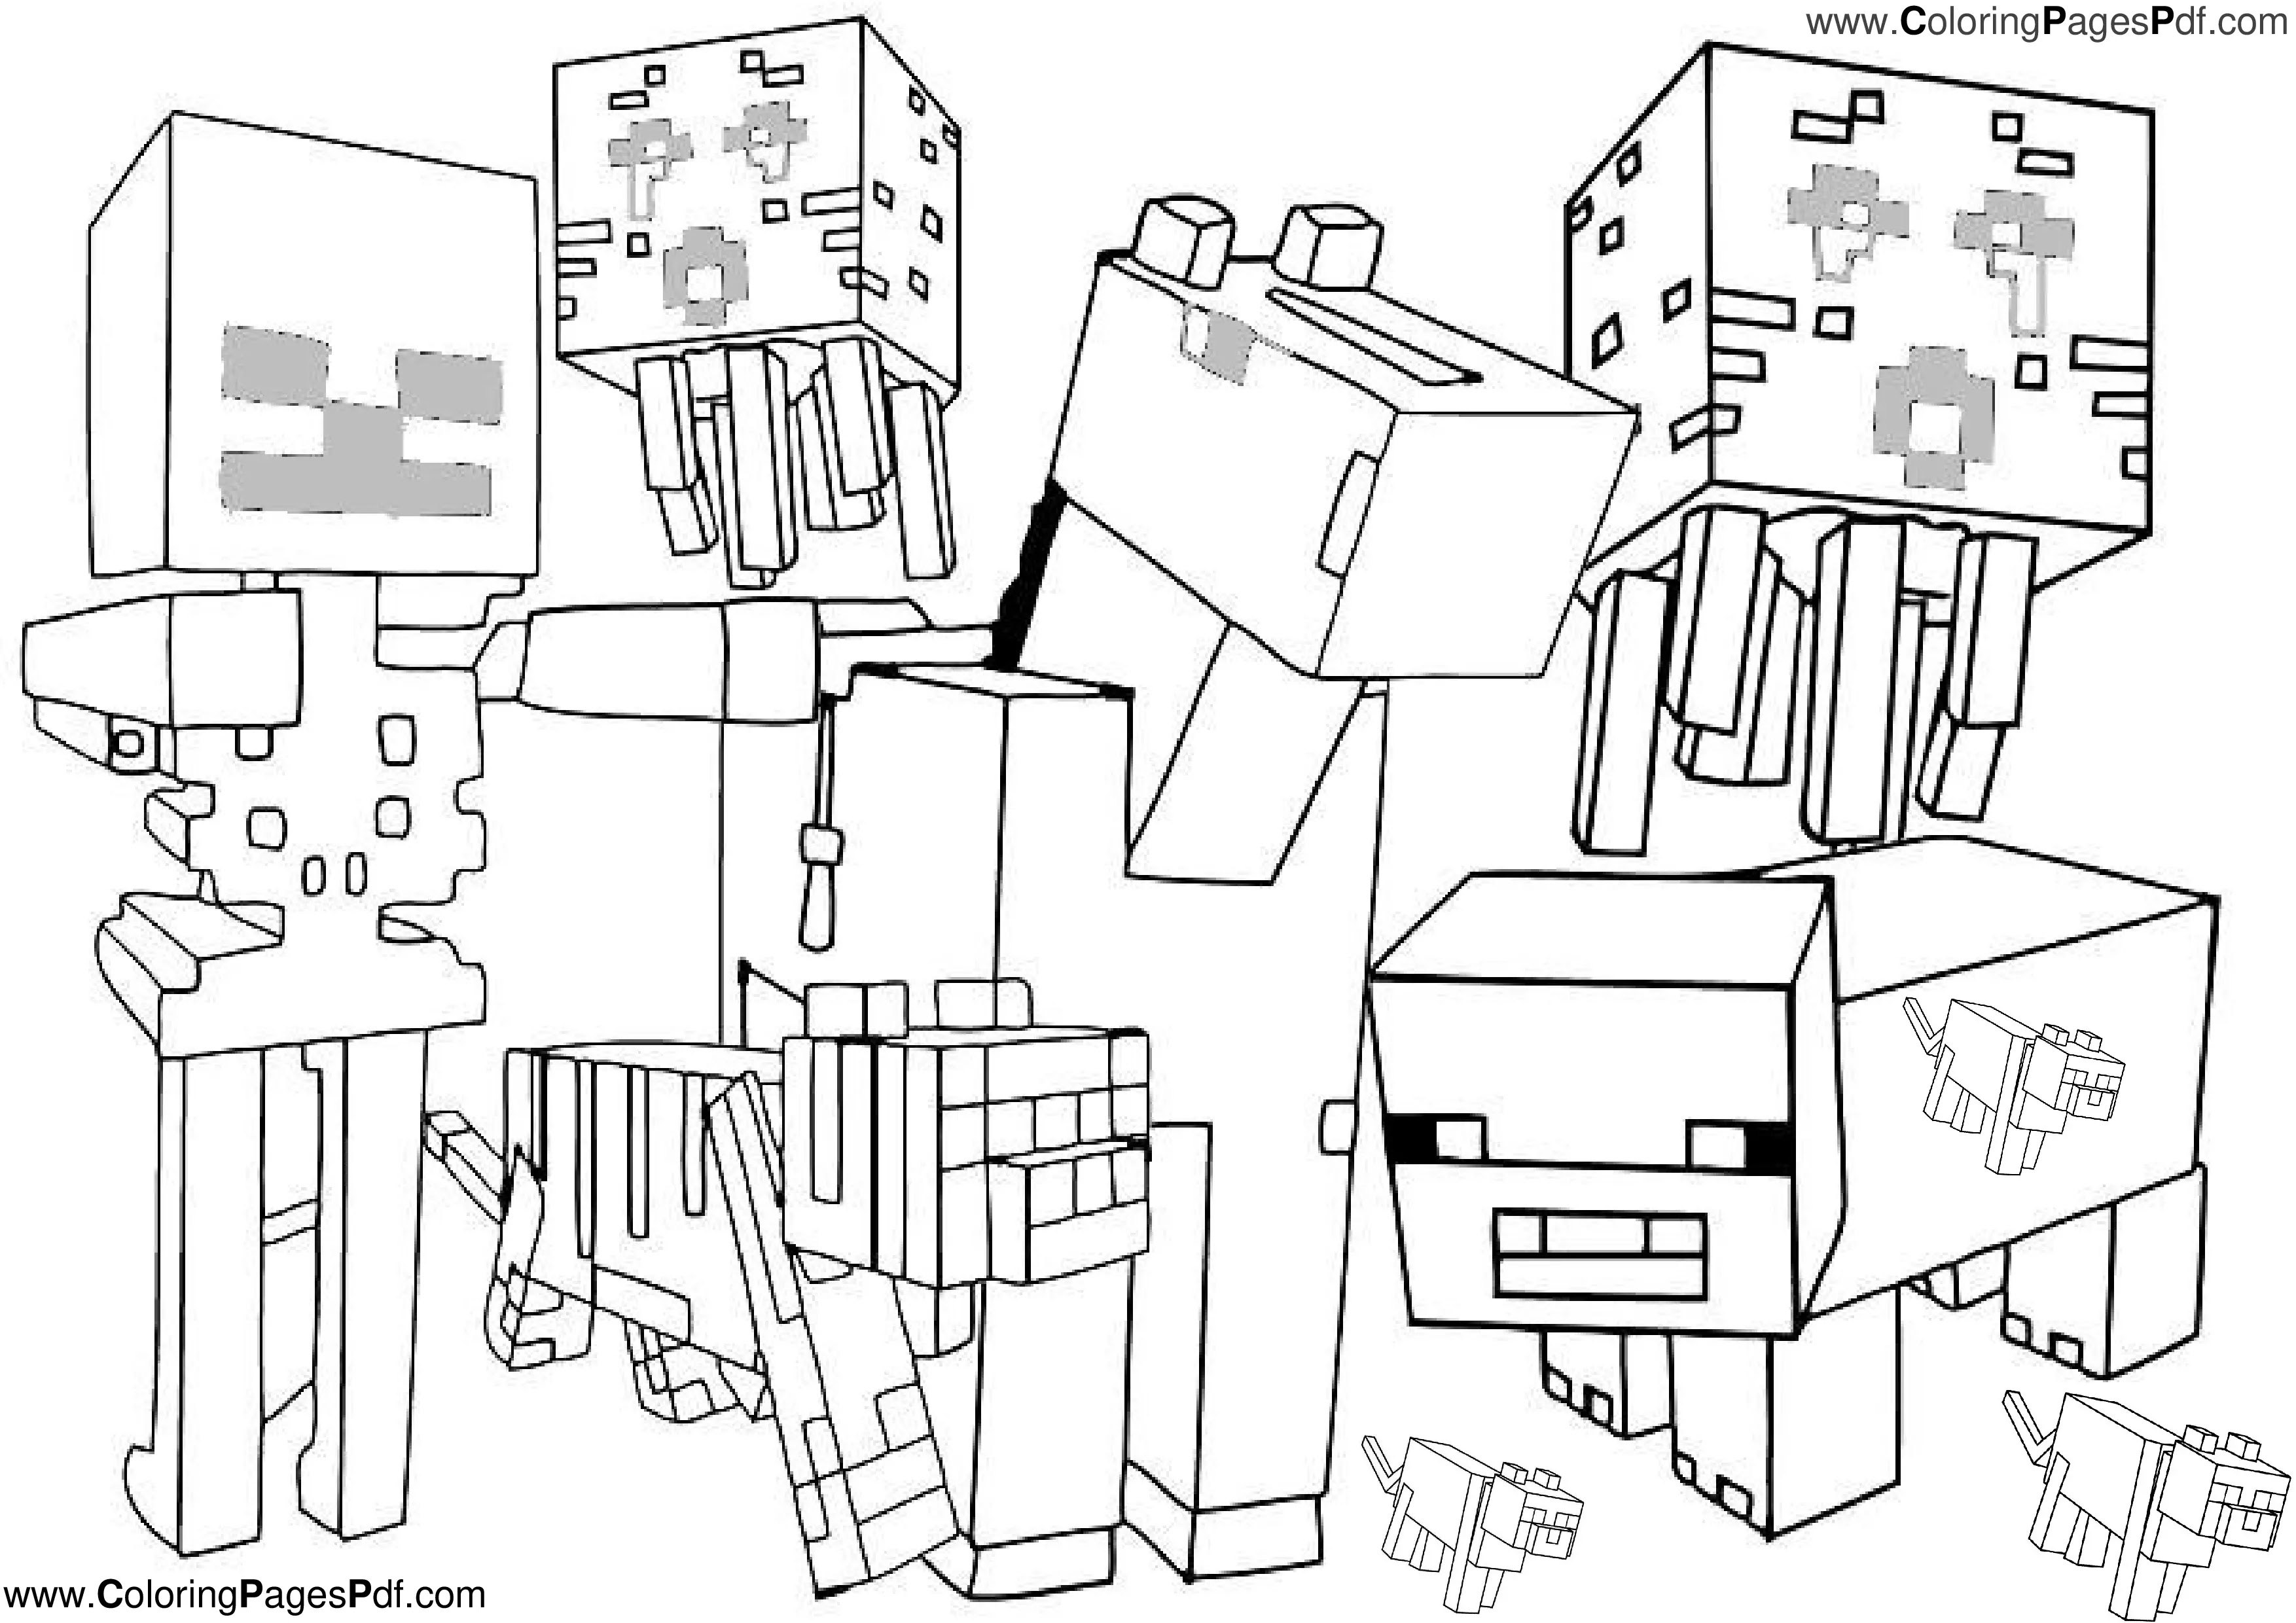 minecraft printable coloring pages,free minecraft coloring pages,free printable minecraft coloring pages,minecraft coloring pages,minecraft coloring sheets,minecraft coloring printables,minecraft printable coloring pages,free minecraft coloring pages,free printable minecraft coloring pages,minecraft coloring pages,minecraft coloring sheets,minecraft coloring printables,cute coloring,peacock coloring,blaze coloring,colour pictures for drawing,batman coloring,lol doll coloring,veggietales coloring pages,animal coloring,ninjago coloring pages,coloring tree,ninjago coloring,ninjago printable,ninjago coloring book